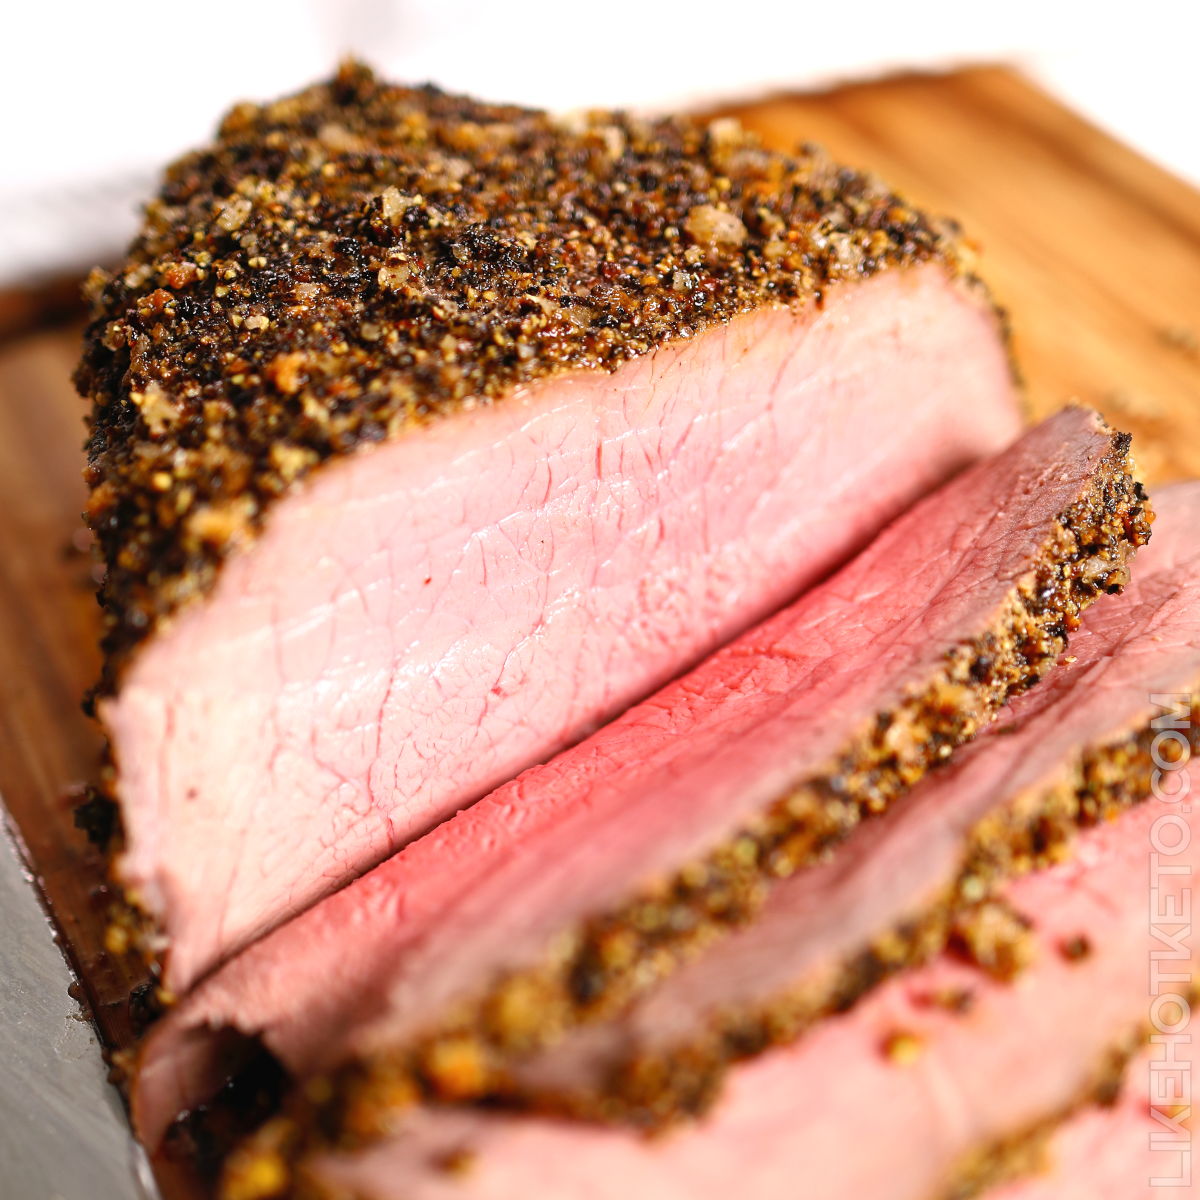 Sliced roast beef top sirloin crusted with crushed peppercorns and coarse sea salt.